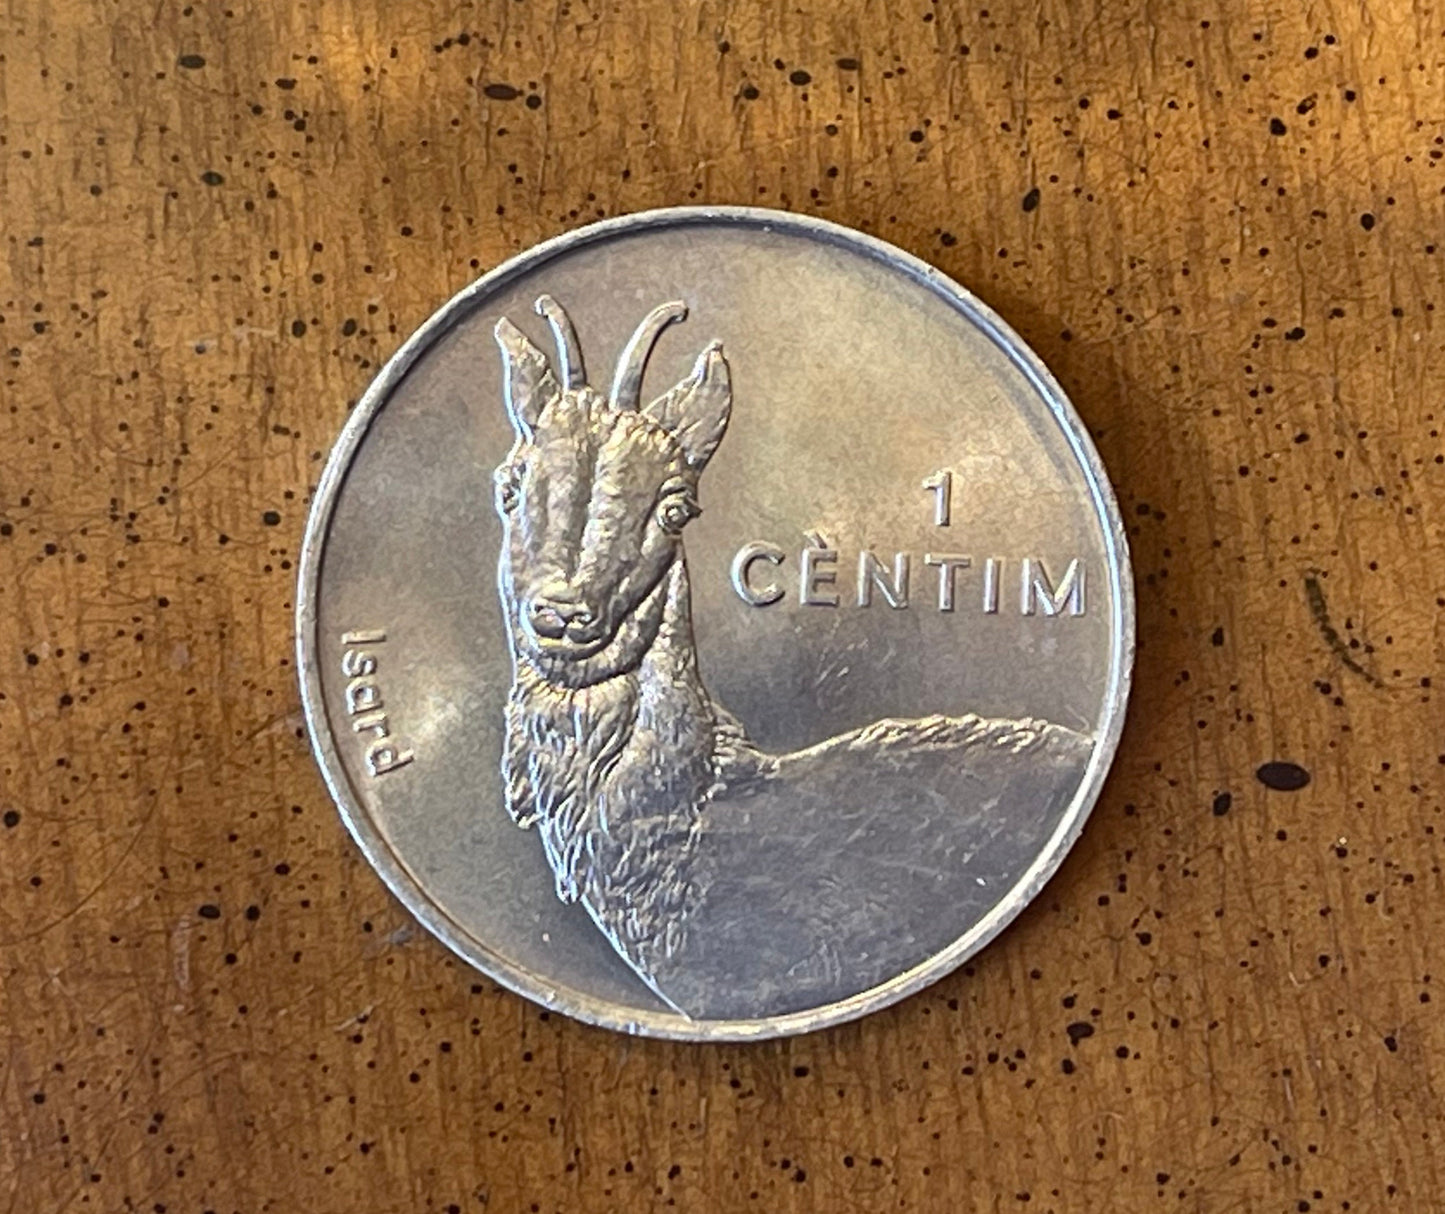 Pyrenean Chamois Goat-Antelope Andorra Authentic Coin 1 Centime Coin Money for Jewelry and Craft Making 2002